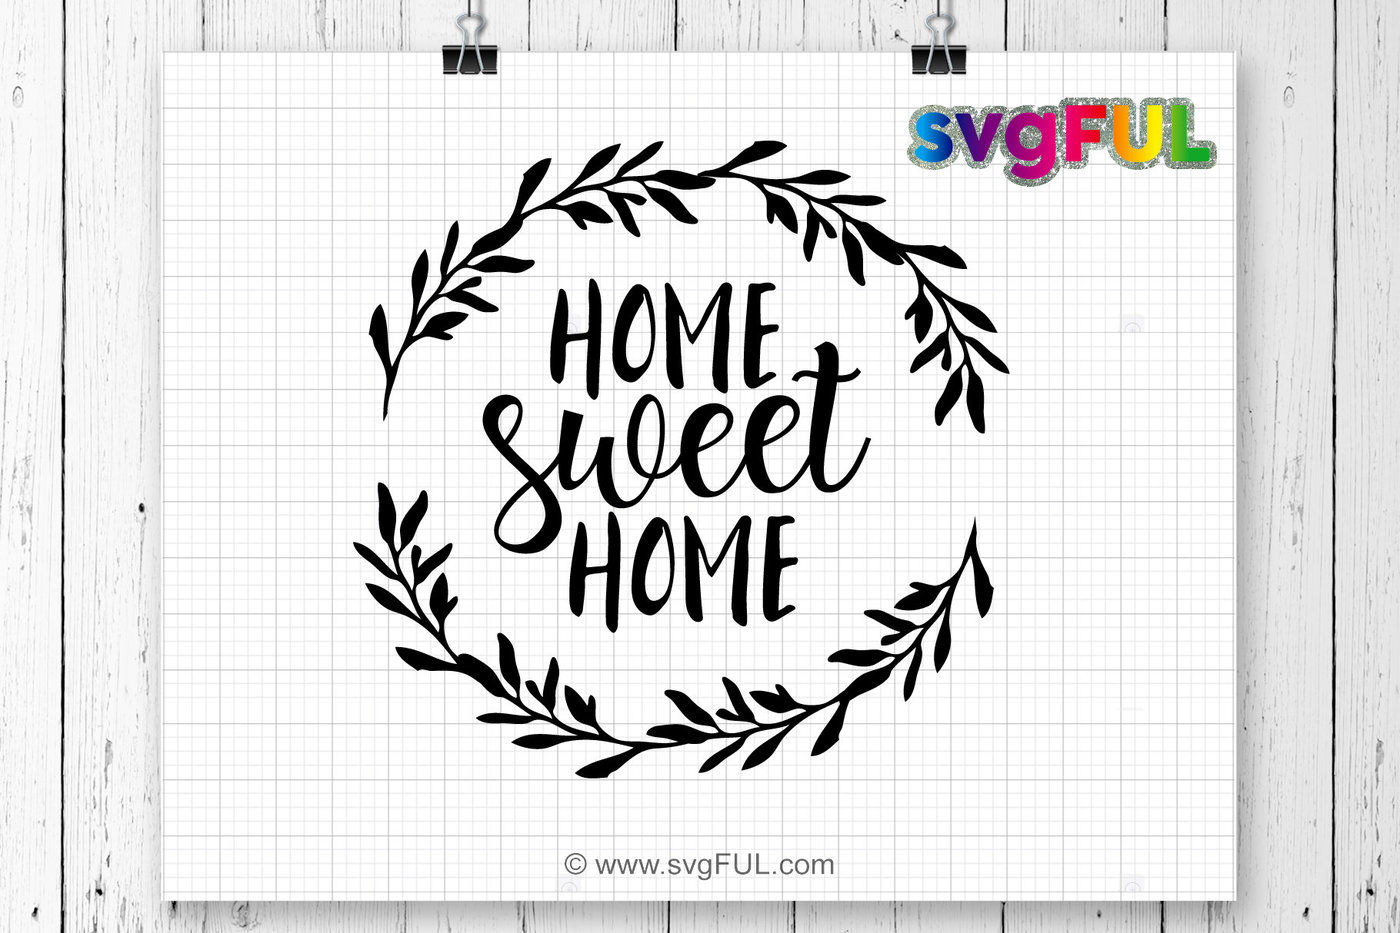 Download Home Sweet Home Svg instant download design cricut, silhouette, Cricut By svgFUL | TheHungryJPEG.com